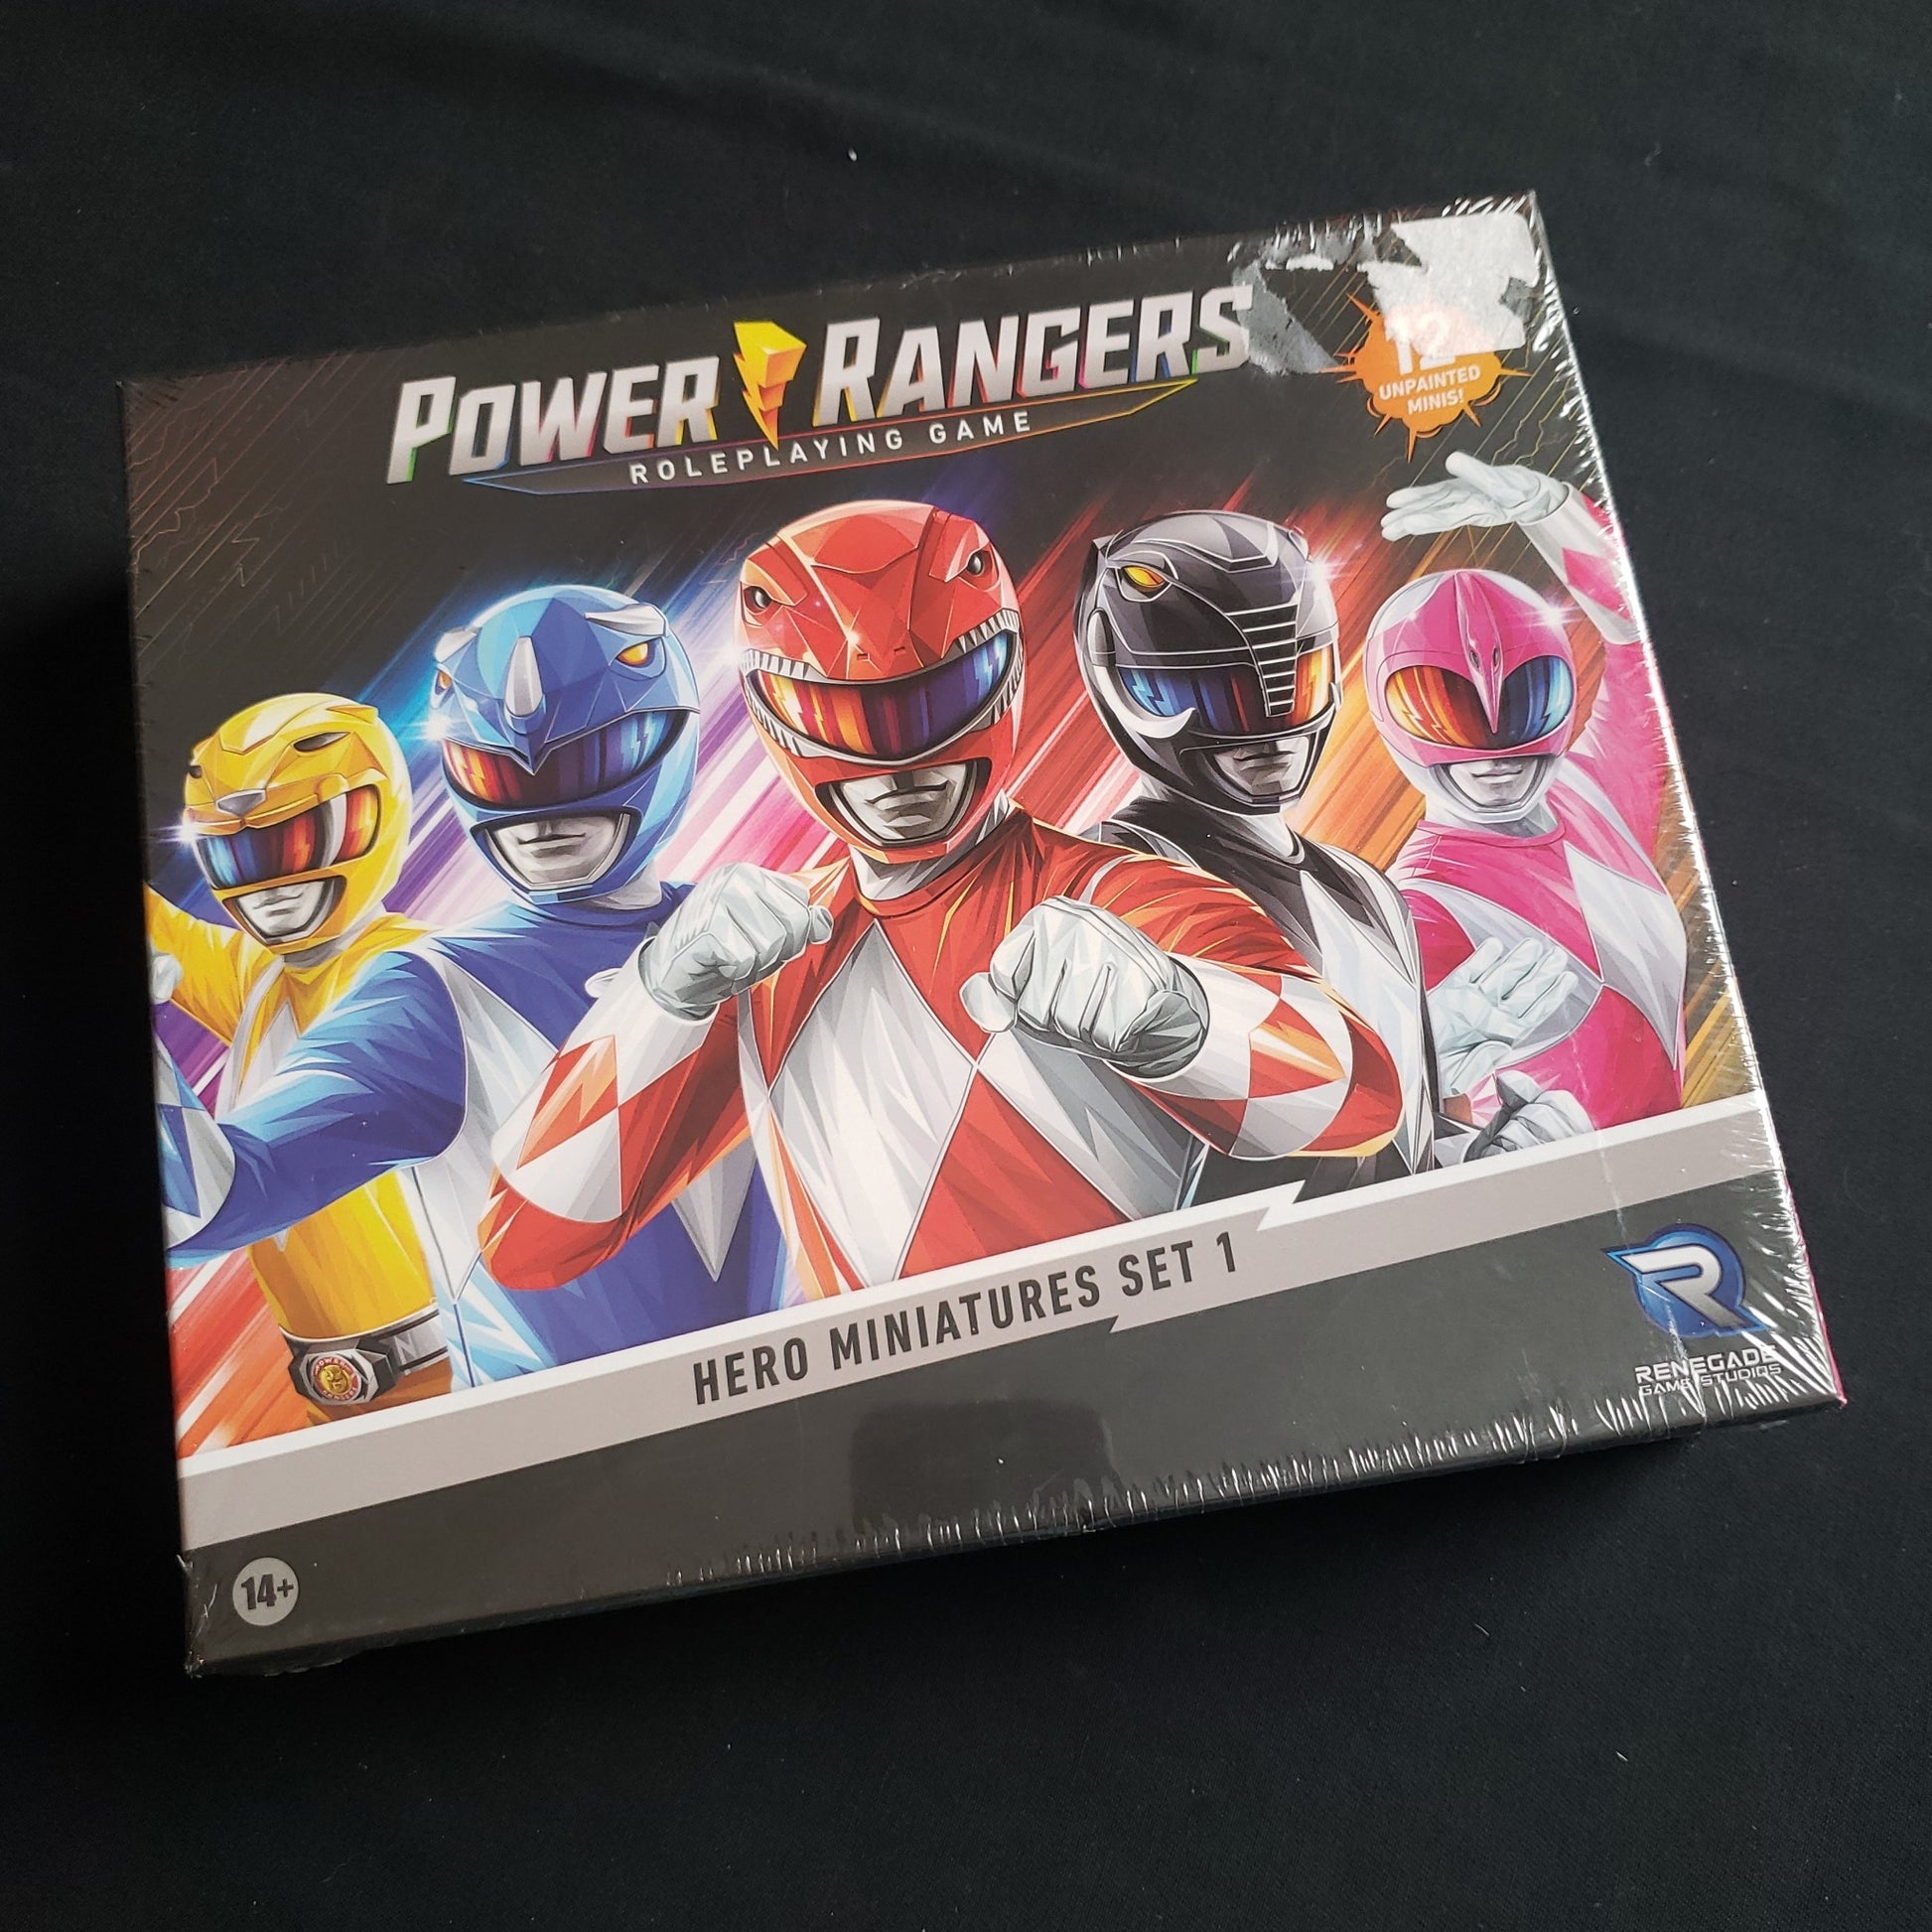 Image shows the front cover of the box of the Hero Miniatures Set 1 for the Power Rangers roleplaying  game